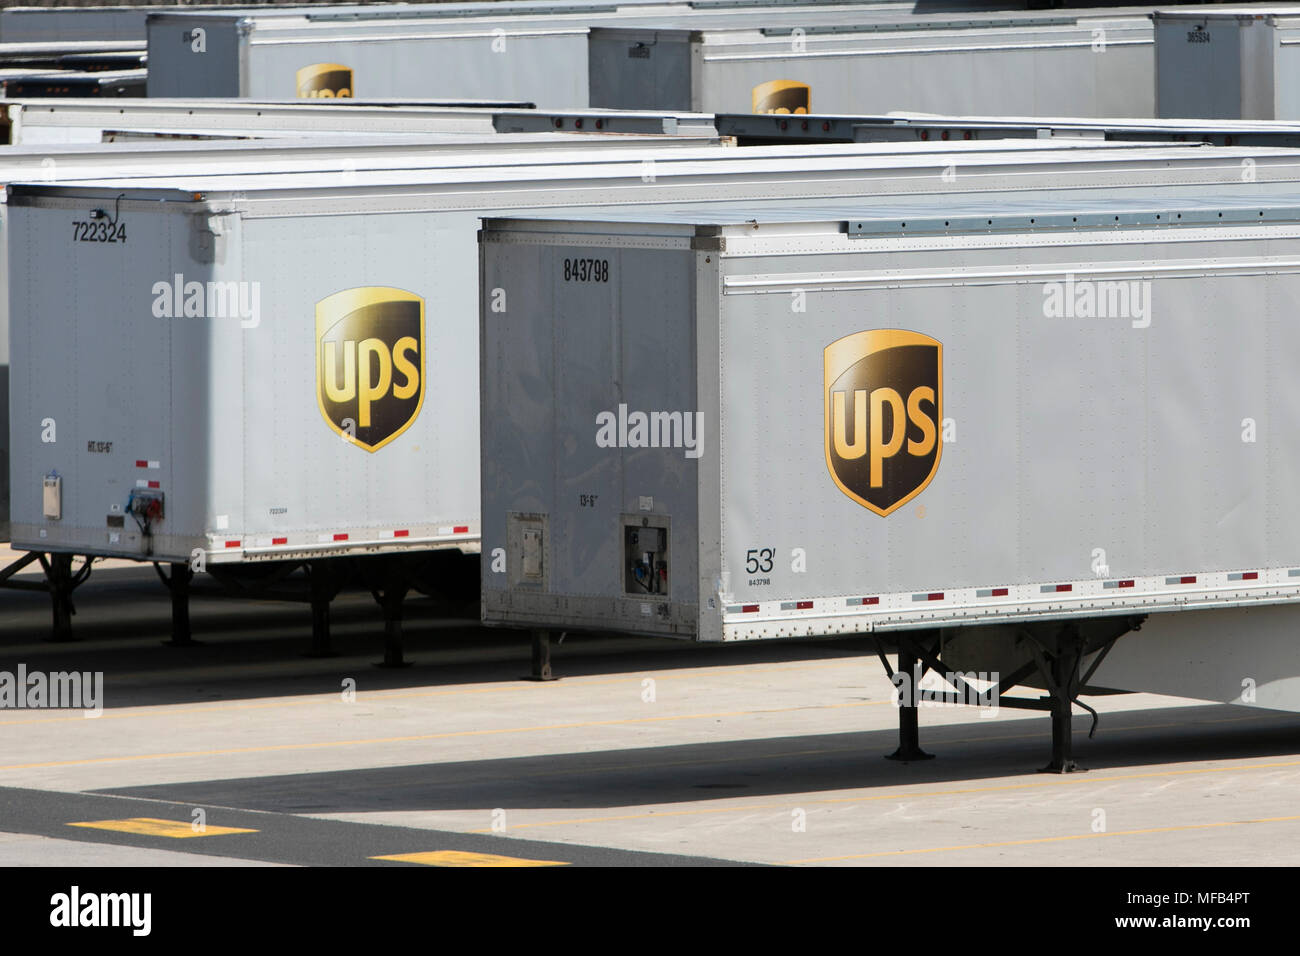 Delivery trucks and trailers at at UPS (United Parcel Service) facility in Horsham, Pennsylvania on April 22, 2018. Stock Photo